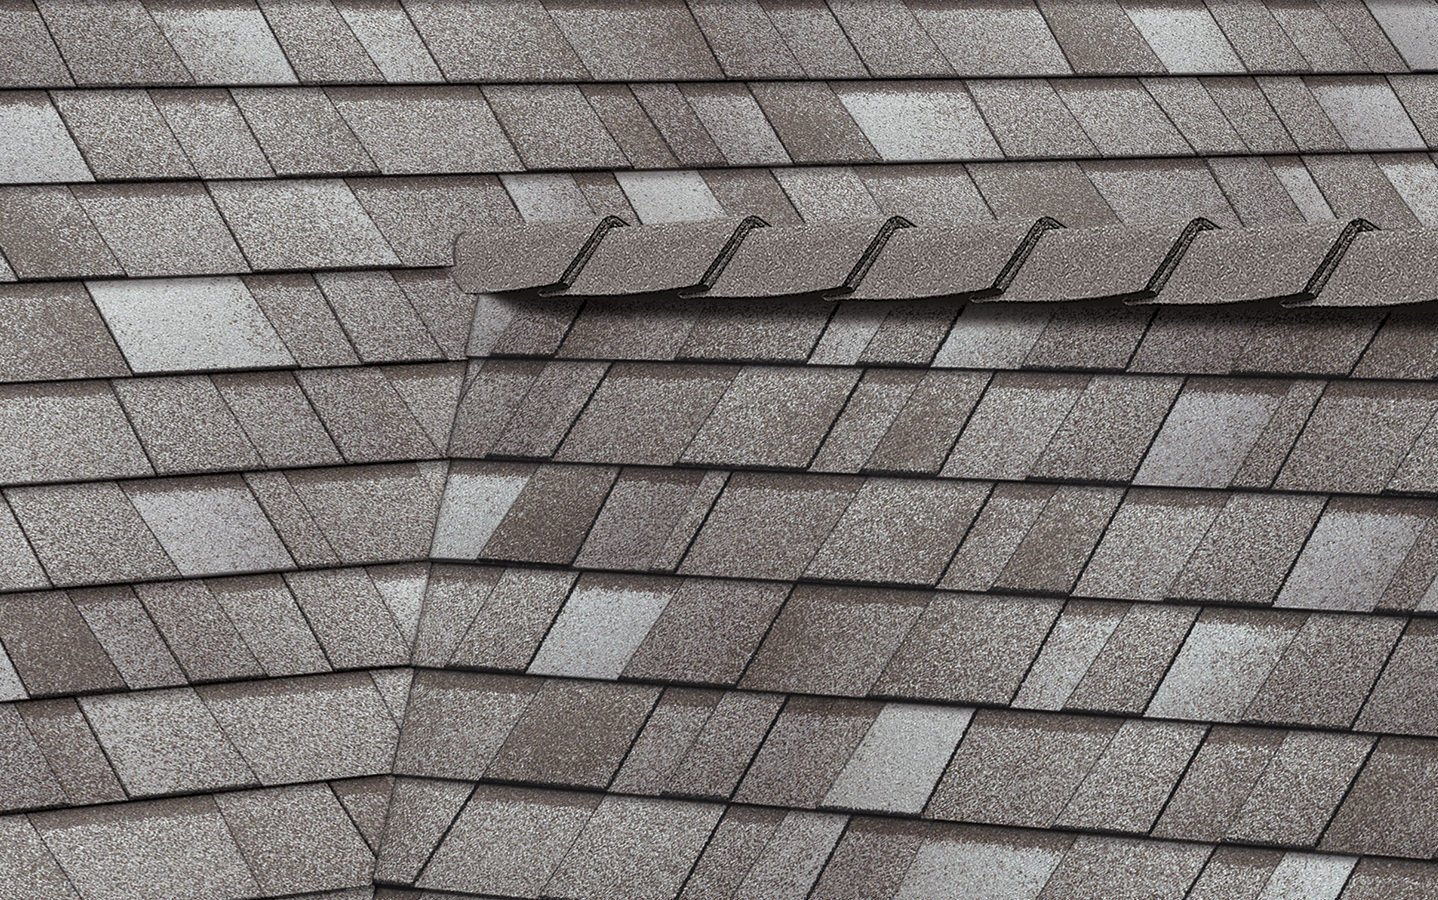 Residential Roof Shingle